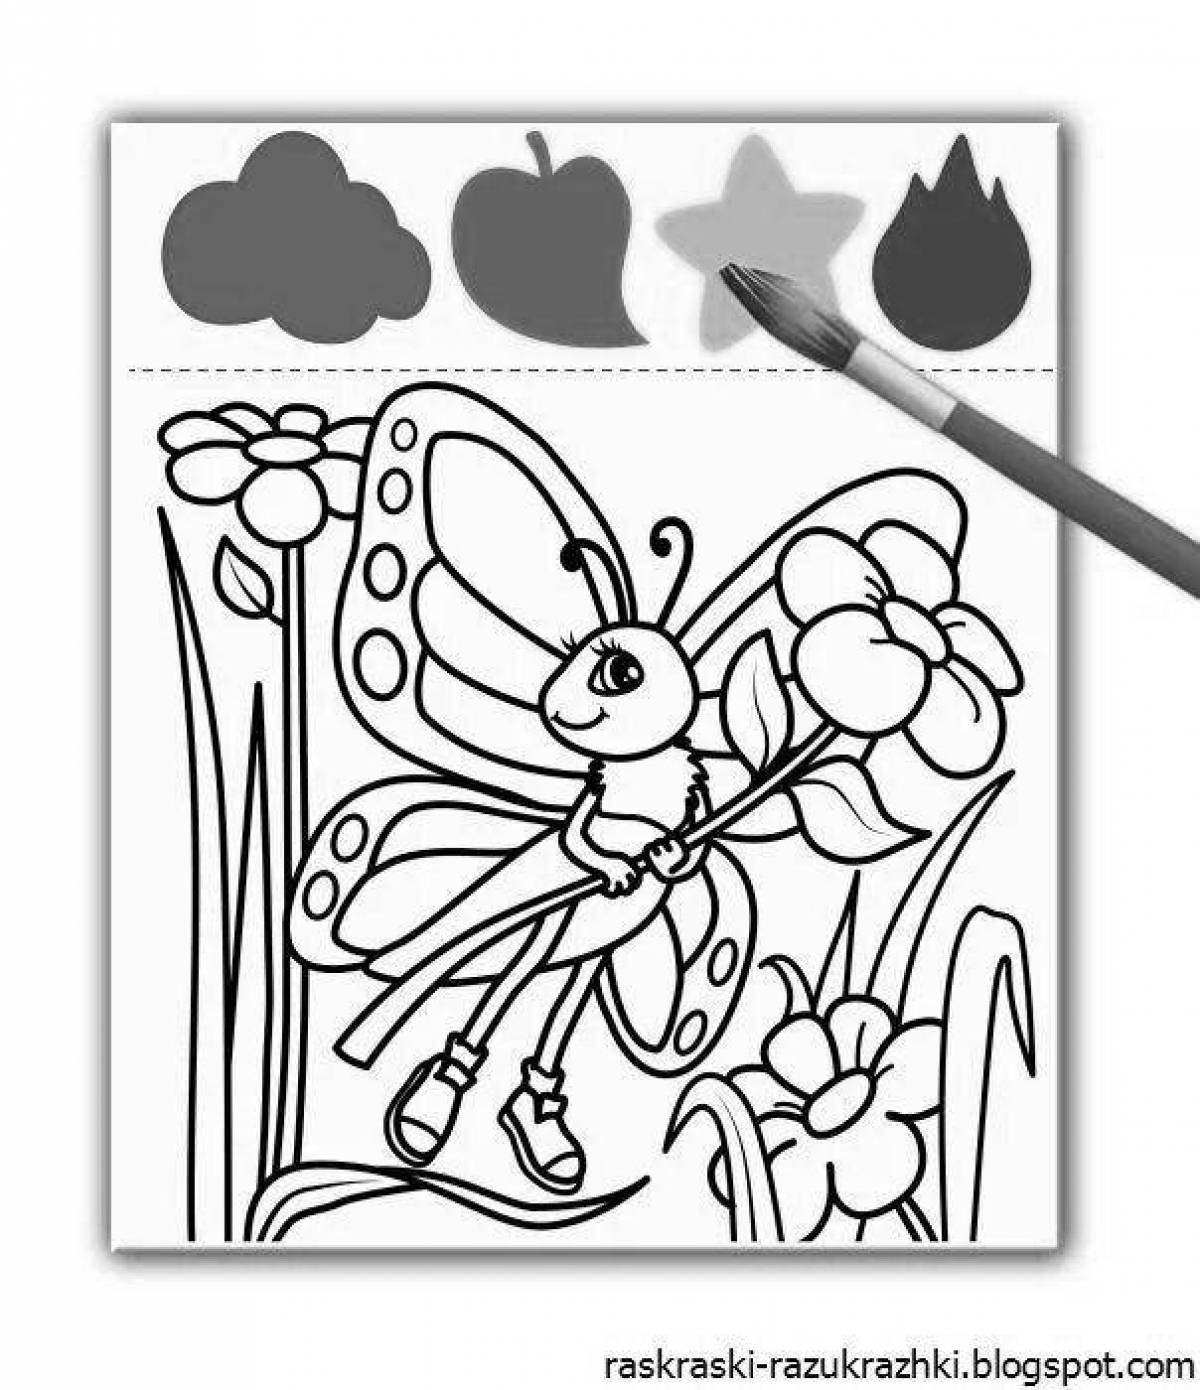 Amazing coloring book for kids